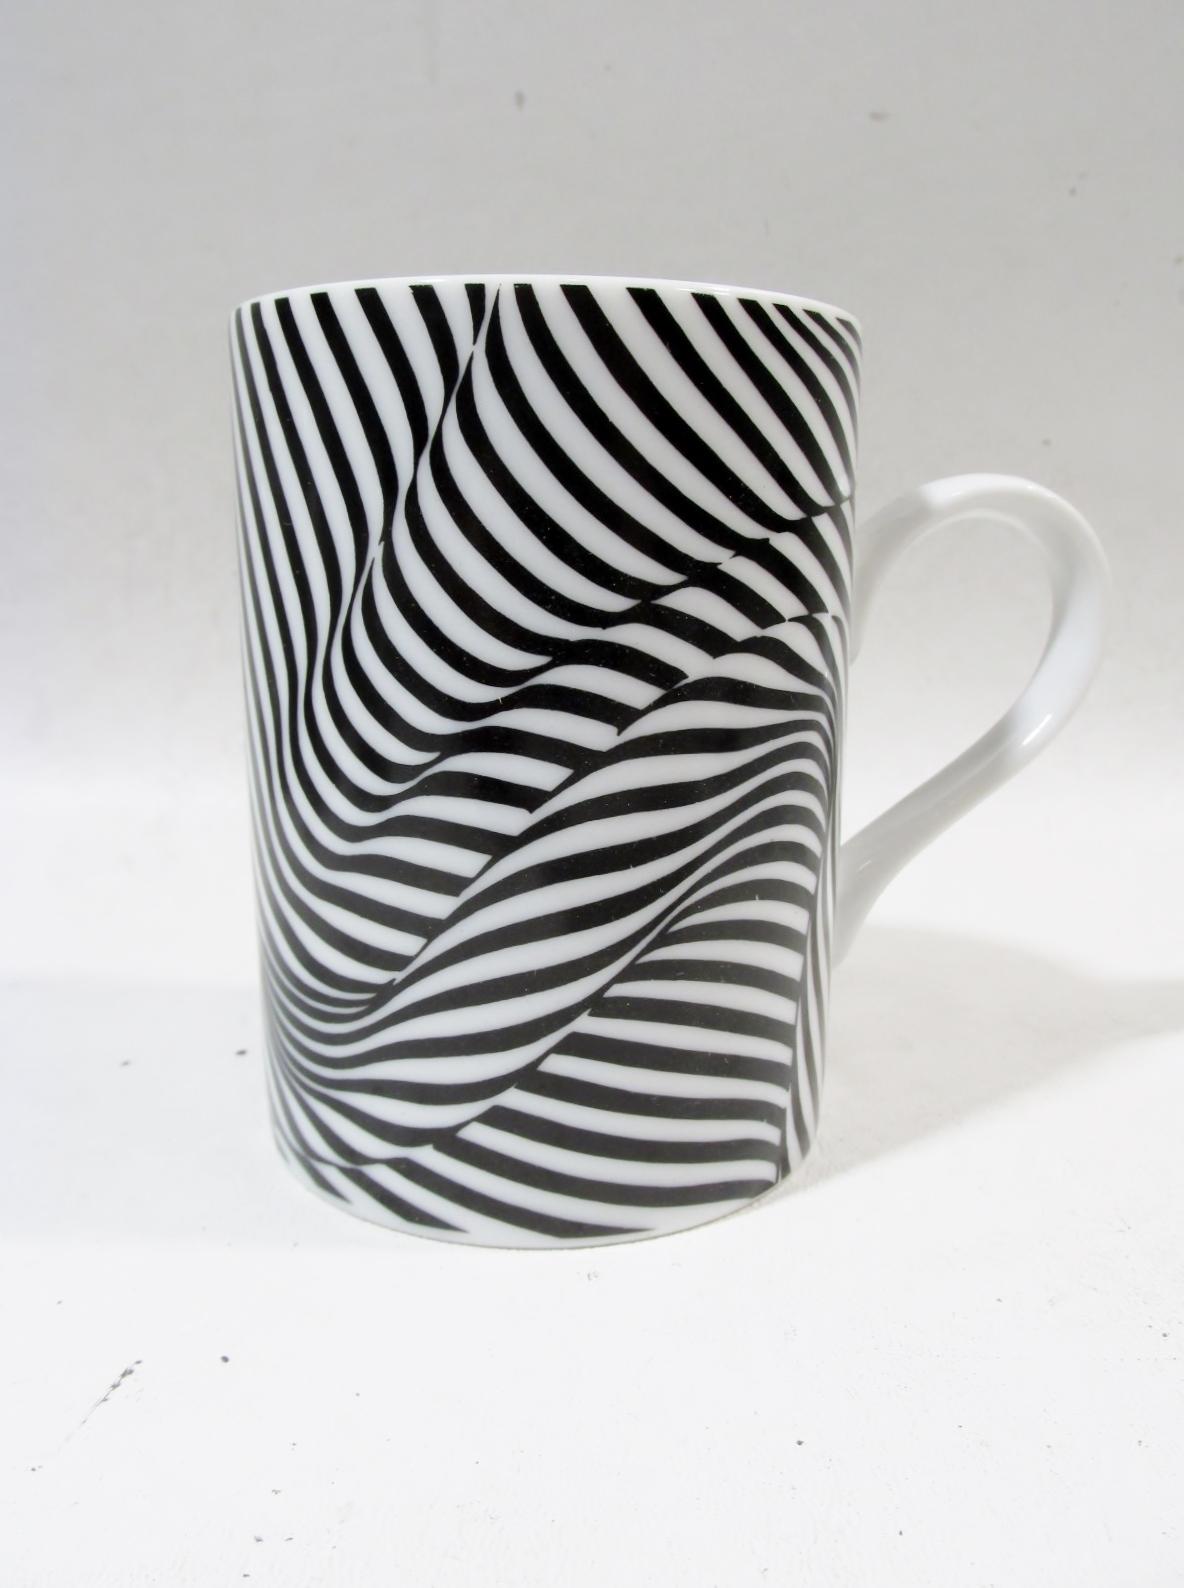 Scarce set of 6 hot drink mugs. From a renowned 1980s series of architect designed tableware in fine porcelain from Swid Powell. Designed by Robert + Trix Haussman. The pattern is black stripes, a Postmodernist optical decoration of